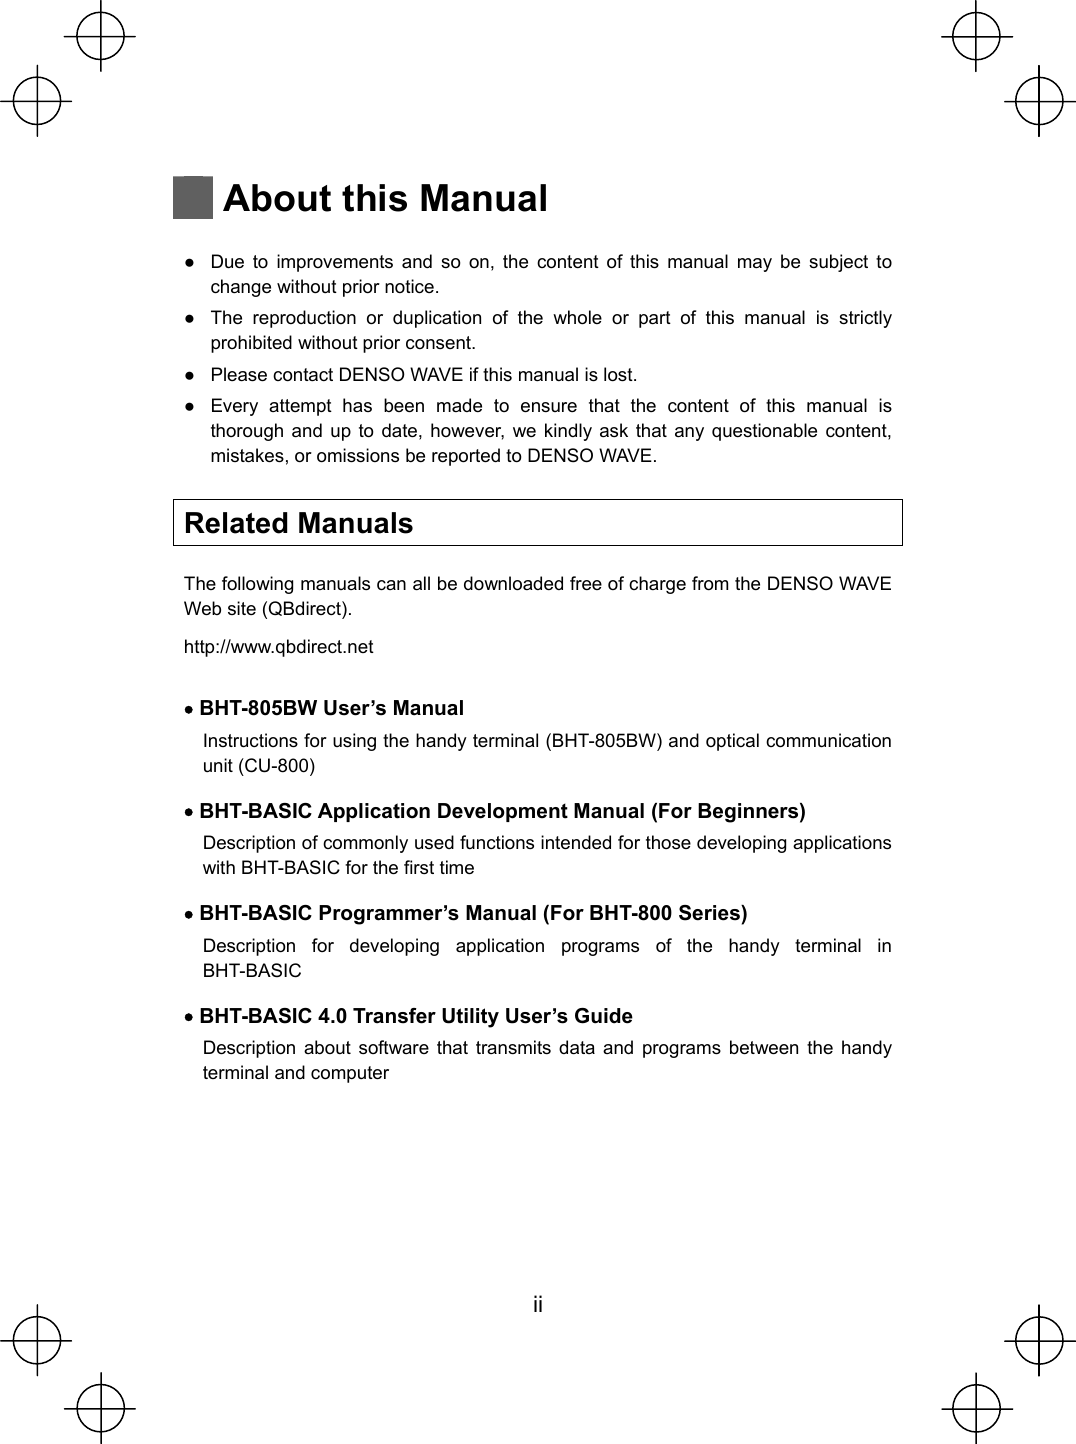  ii   About this Manual  Ɣ  Due to improvements and so on, the content of this manual may be subject to change without prior notice. Ɣ  The reproduction or duplication of the whole or part of this manual is strictly prohibited without prior consent. Ɣ  Please contact DENSO WAVE if this manual is lost. Ɣ  Every attempt has been made to ensure that the content of this manual is thorough and up to date, however, we kindly ask that any questionable content, mistakes, or omissions be reported to DENSO WAVE.  Related Manuals  The following manuals can all be downloaded free of charge from the DENSO WAVE Web site (QBdirect). http://www.qbdirect.net  x BHT-805BW User’s Manual Instructions for using the handy terminal (BHT-805BW) and optical communication unit (CU-800) x BHT-BASIC Application Development Manual (For Beginners) Description of commonly used functions intended for those developing applications with BHT-BASIC for the first time x BHT-BASIC Programmer’s Manual (For BHT-800 Series) Description for developing application programs of the handy terminal in BHT-BASIC x BHT-BASIC 4.0 Transfer Utility User’s Guide Description about software that transmits data and programs between the handy terminal and computer  